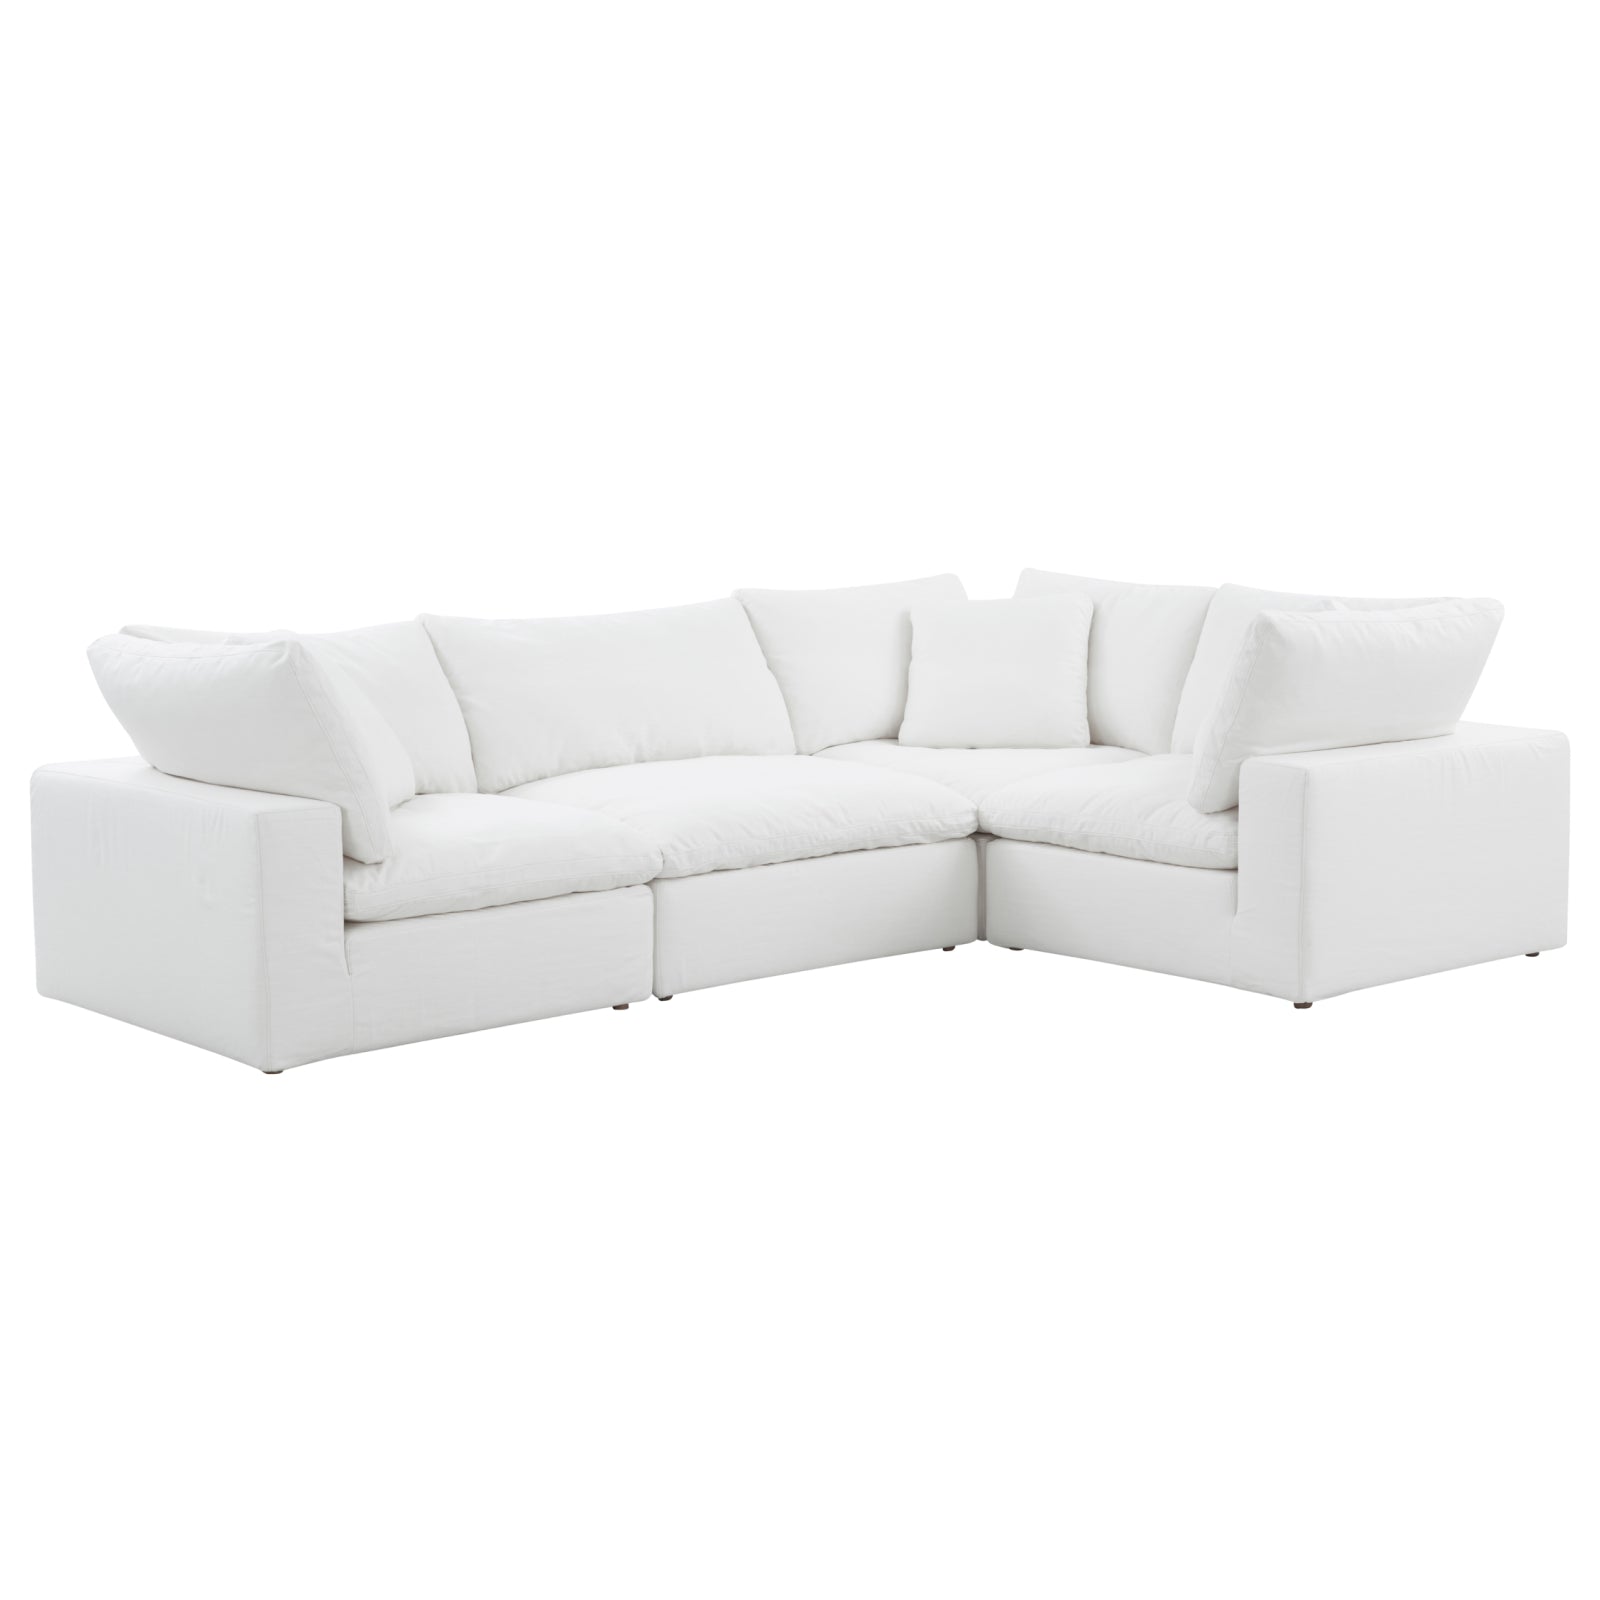 Movie Night™ 4-Piece Modular Sectional Closed, Large, Brie - Image 12